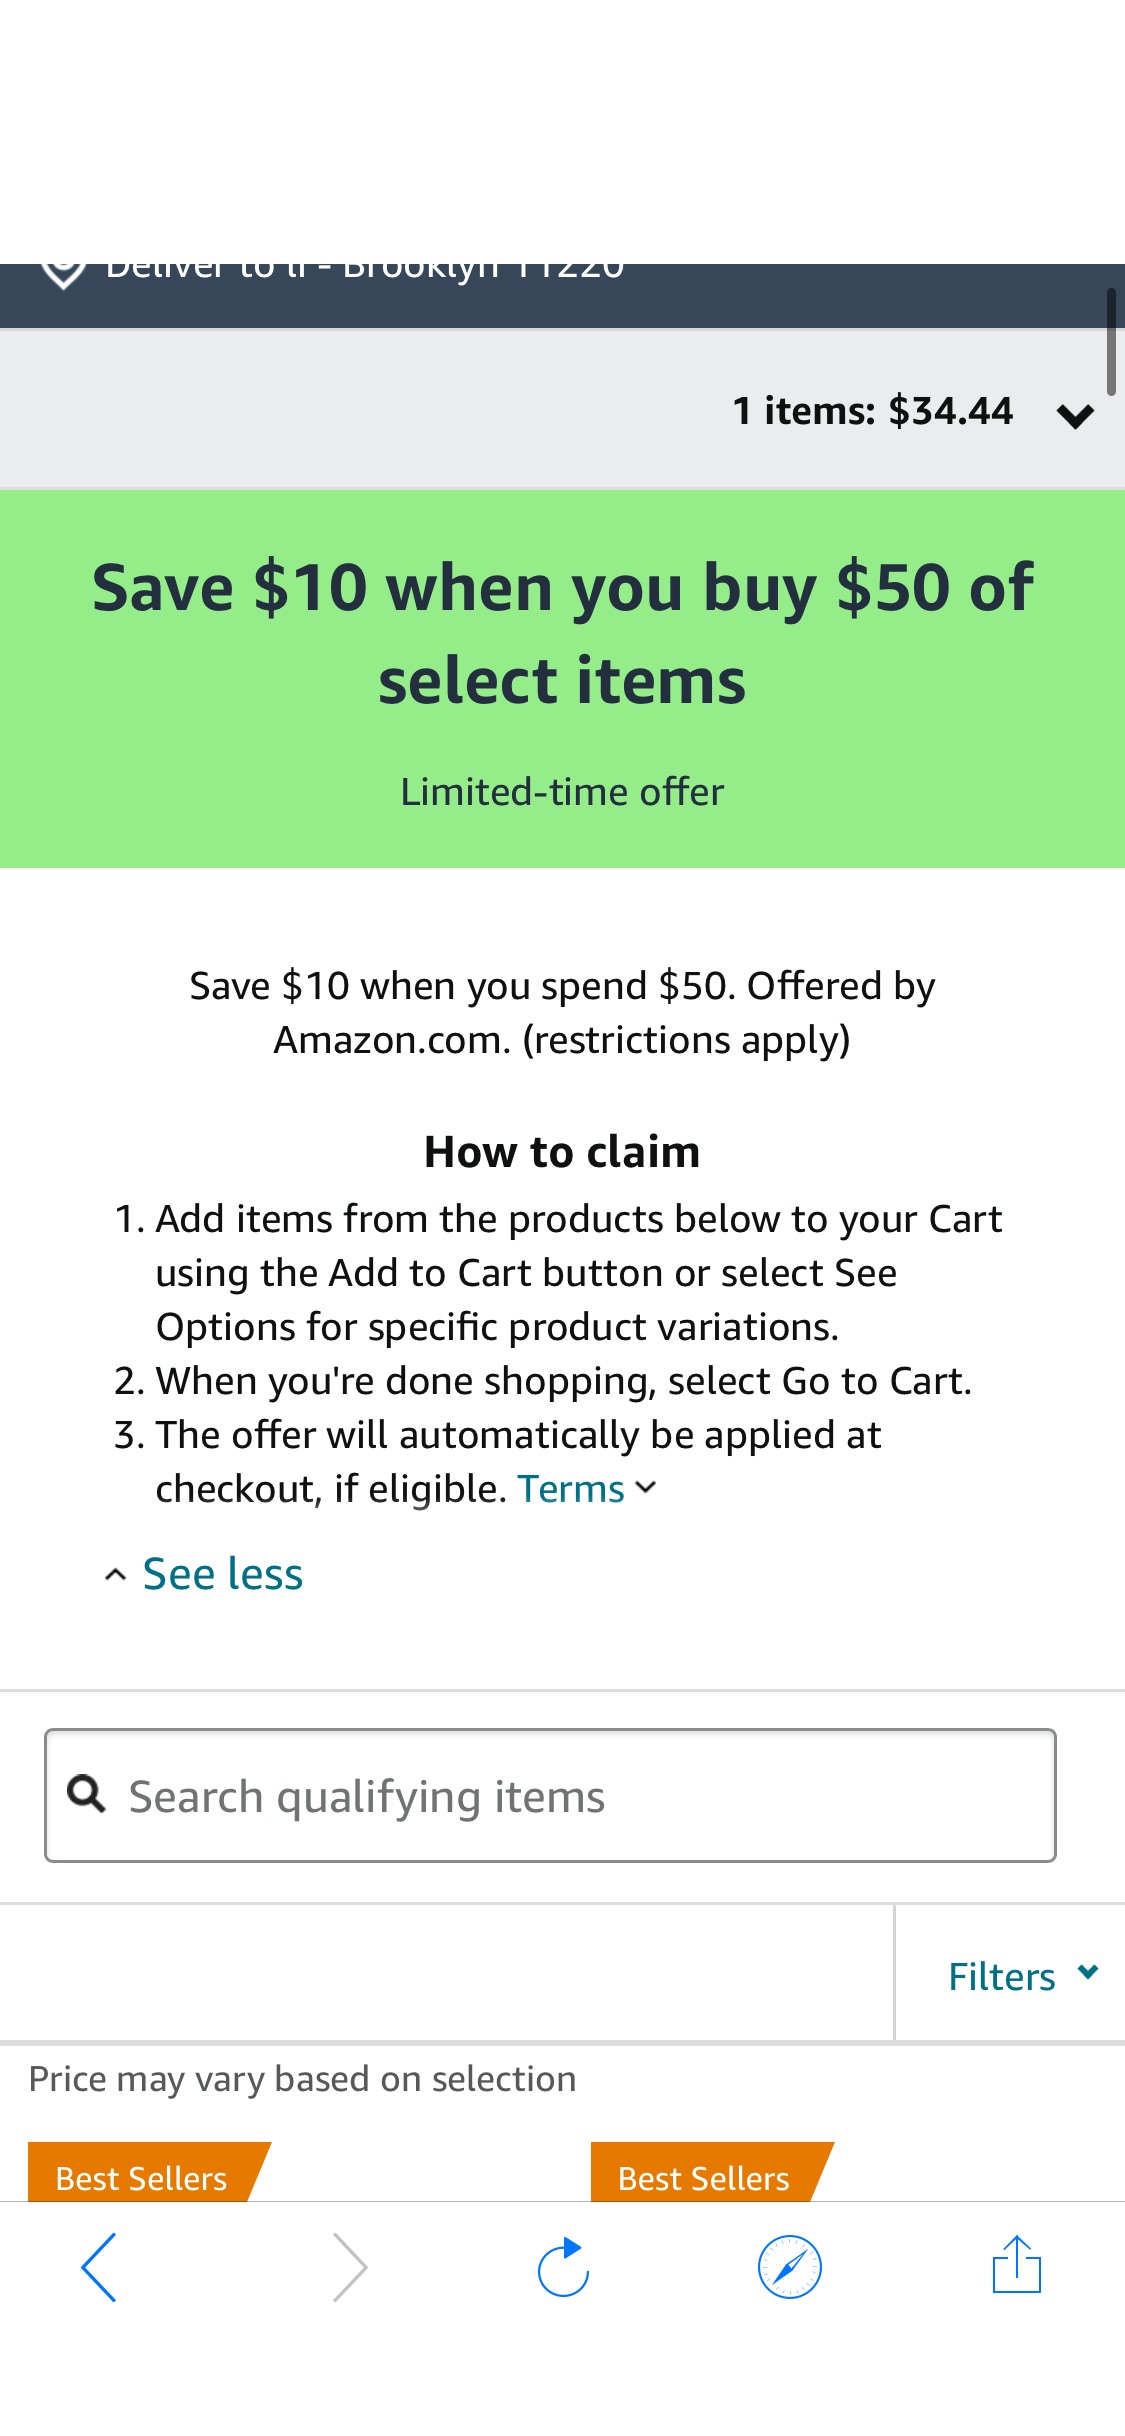 Amazon.com: Save $10 when you buy $50 of select items promotion儿童玩具